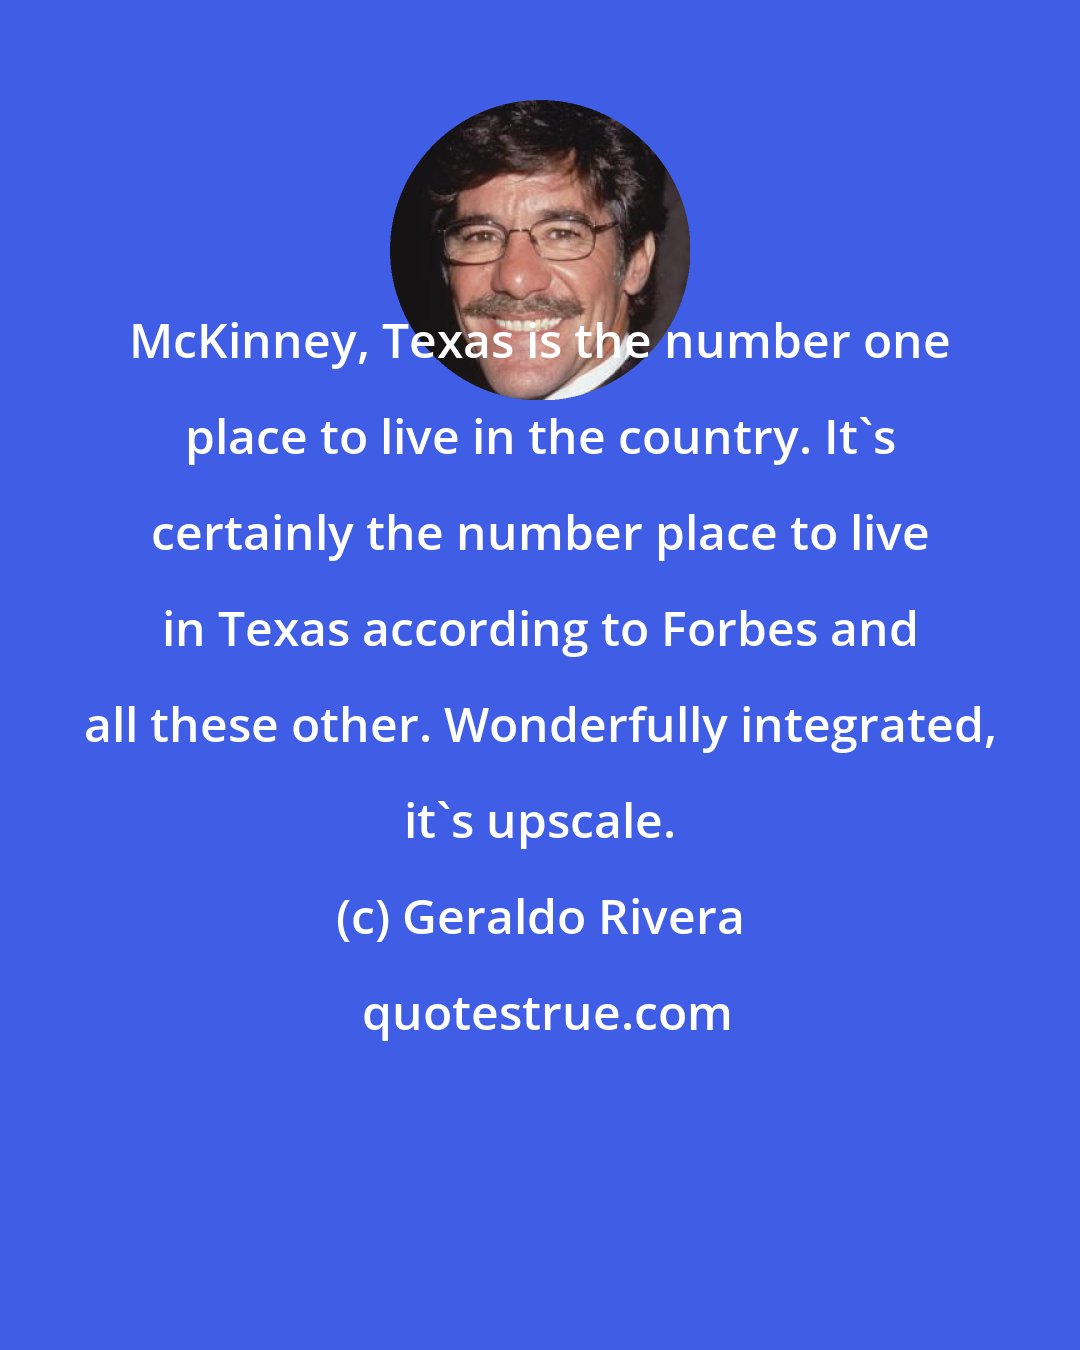 Geraldo Rivera: McKinney, Texas is the number one place to live in the country. It's certainly the number place to live in Texas according to Forbes and all these other. Wonderfully integrated, it's upscale.